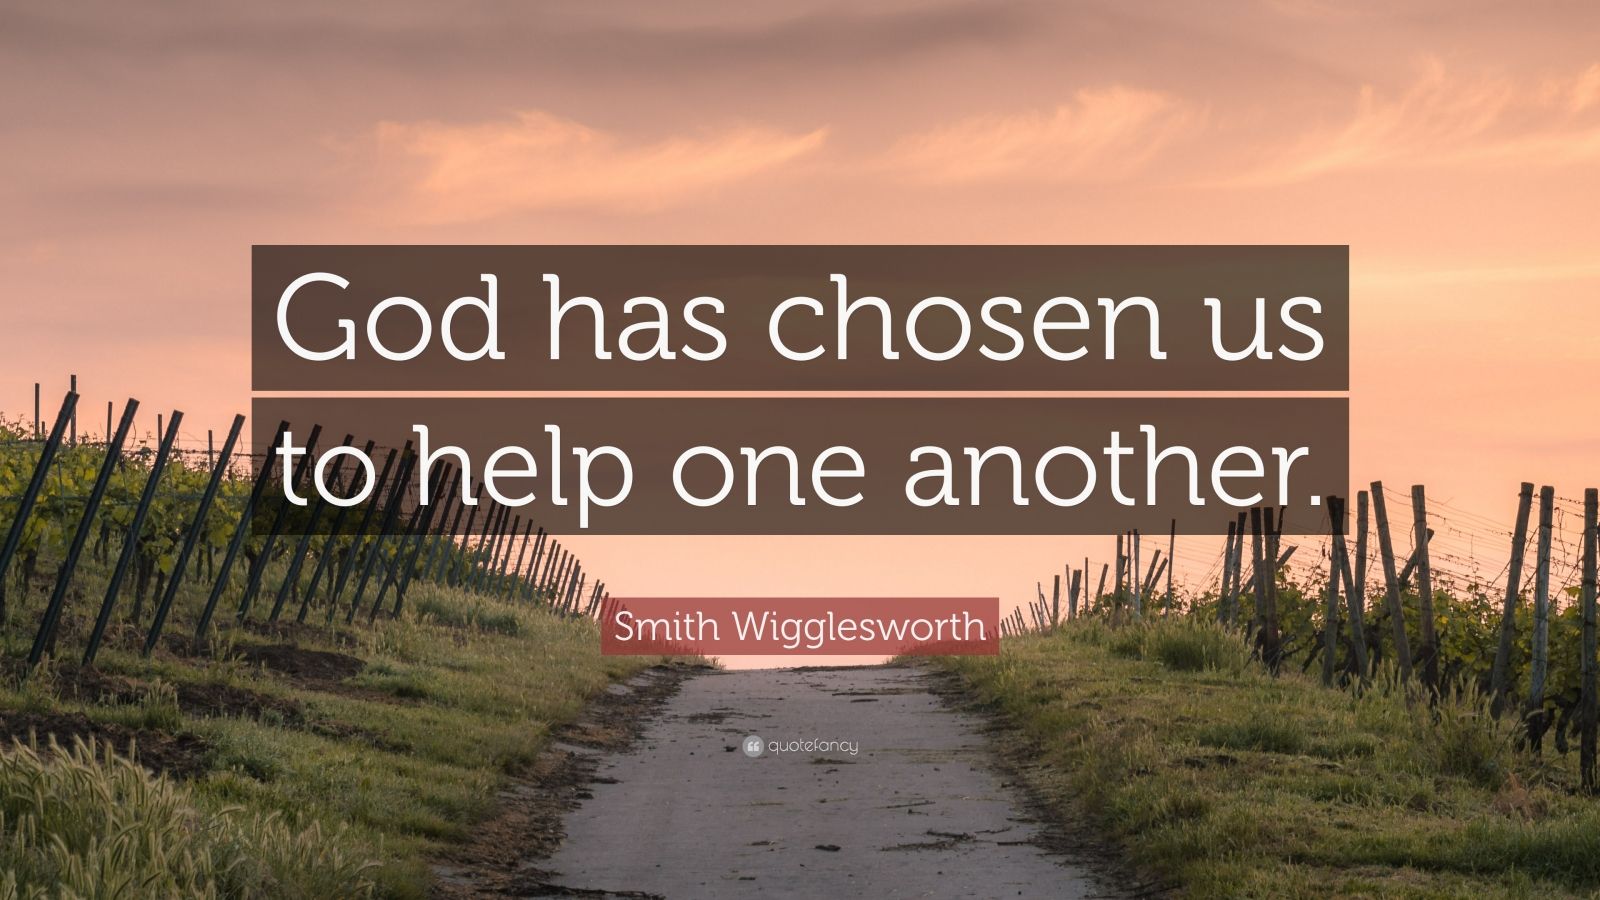 Smith Wigglesworth Quote: “God has chosen us to help one another.” (11 ...